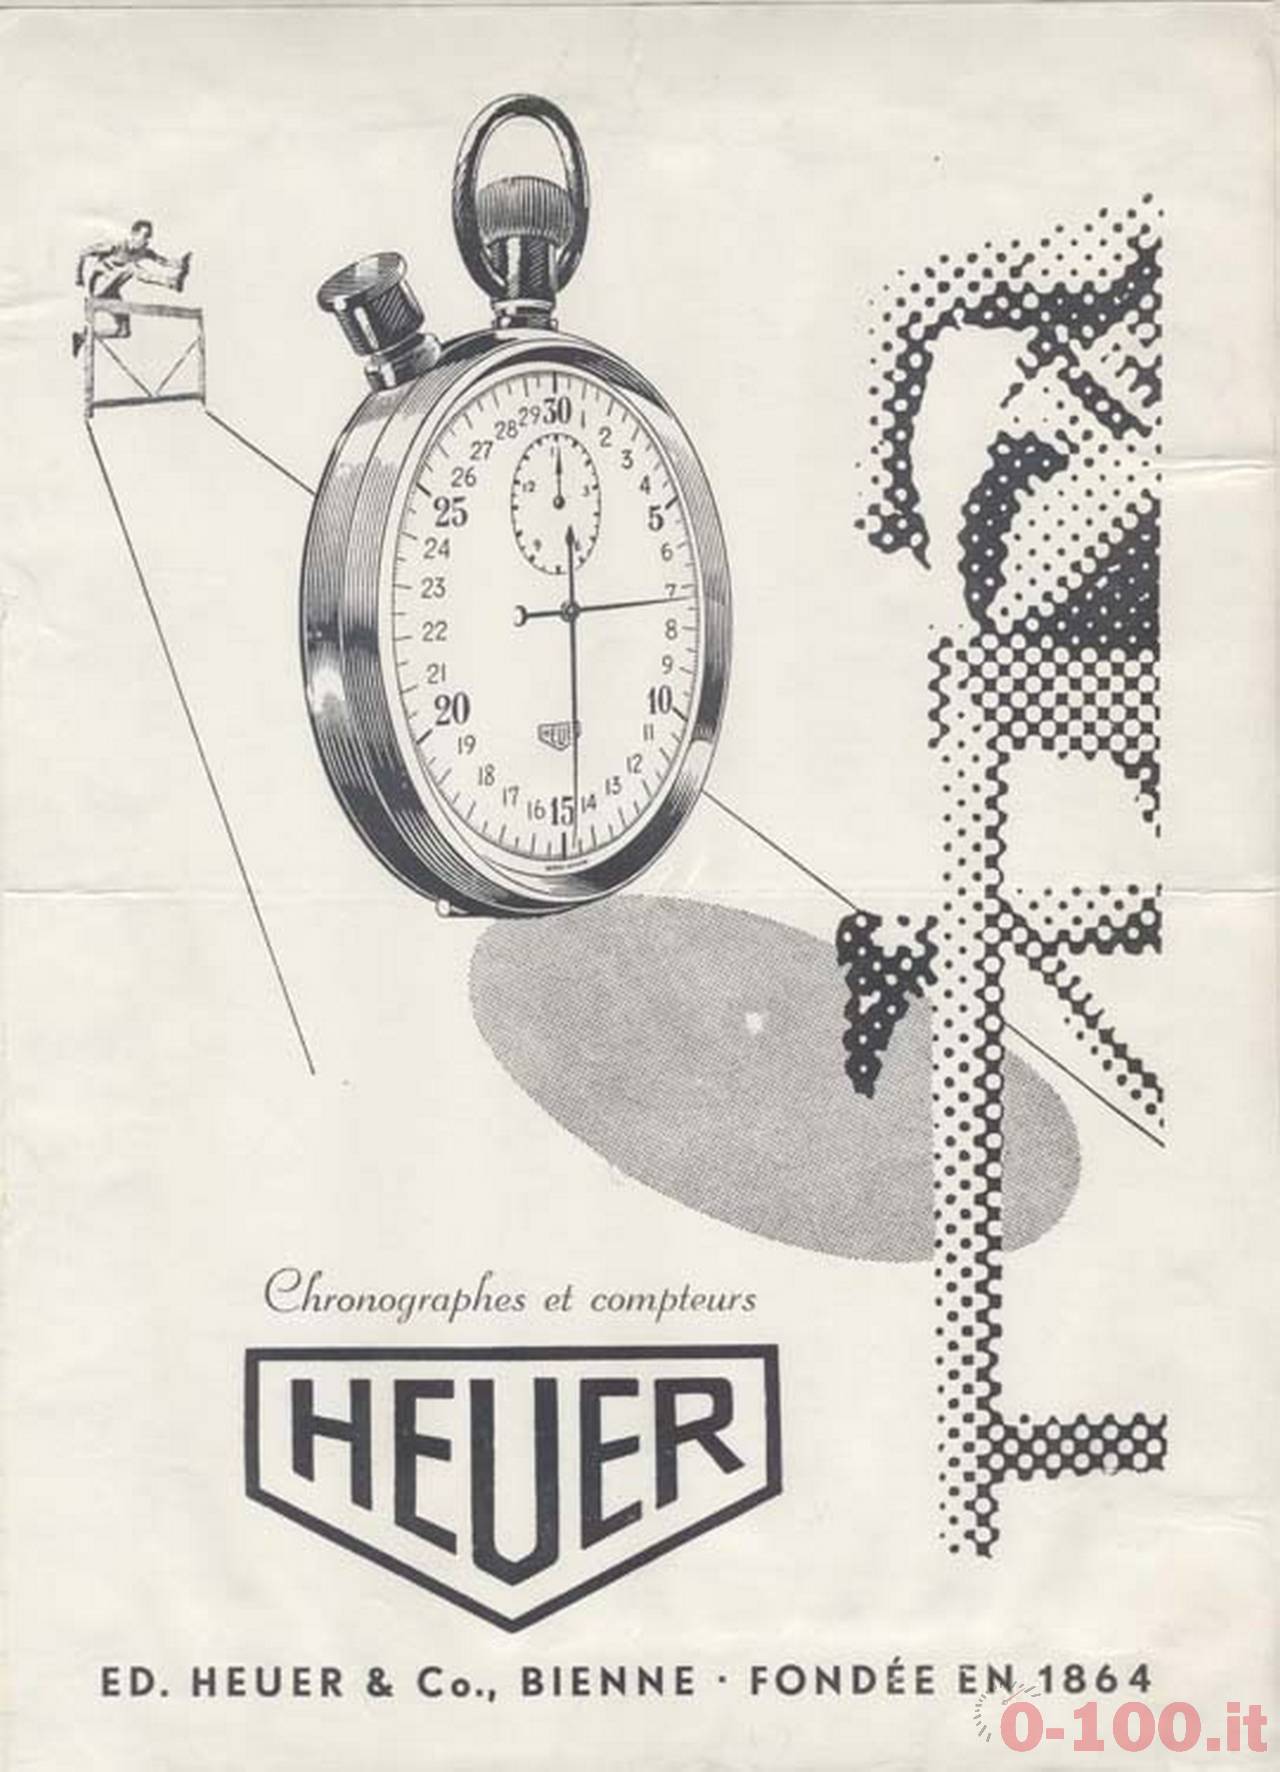 Heuer advertising canpaign, before 1944